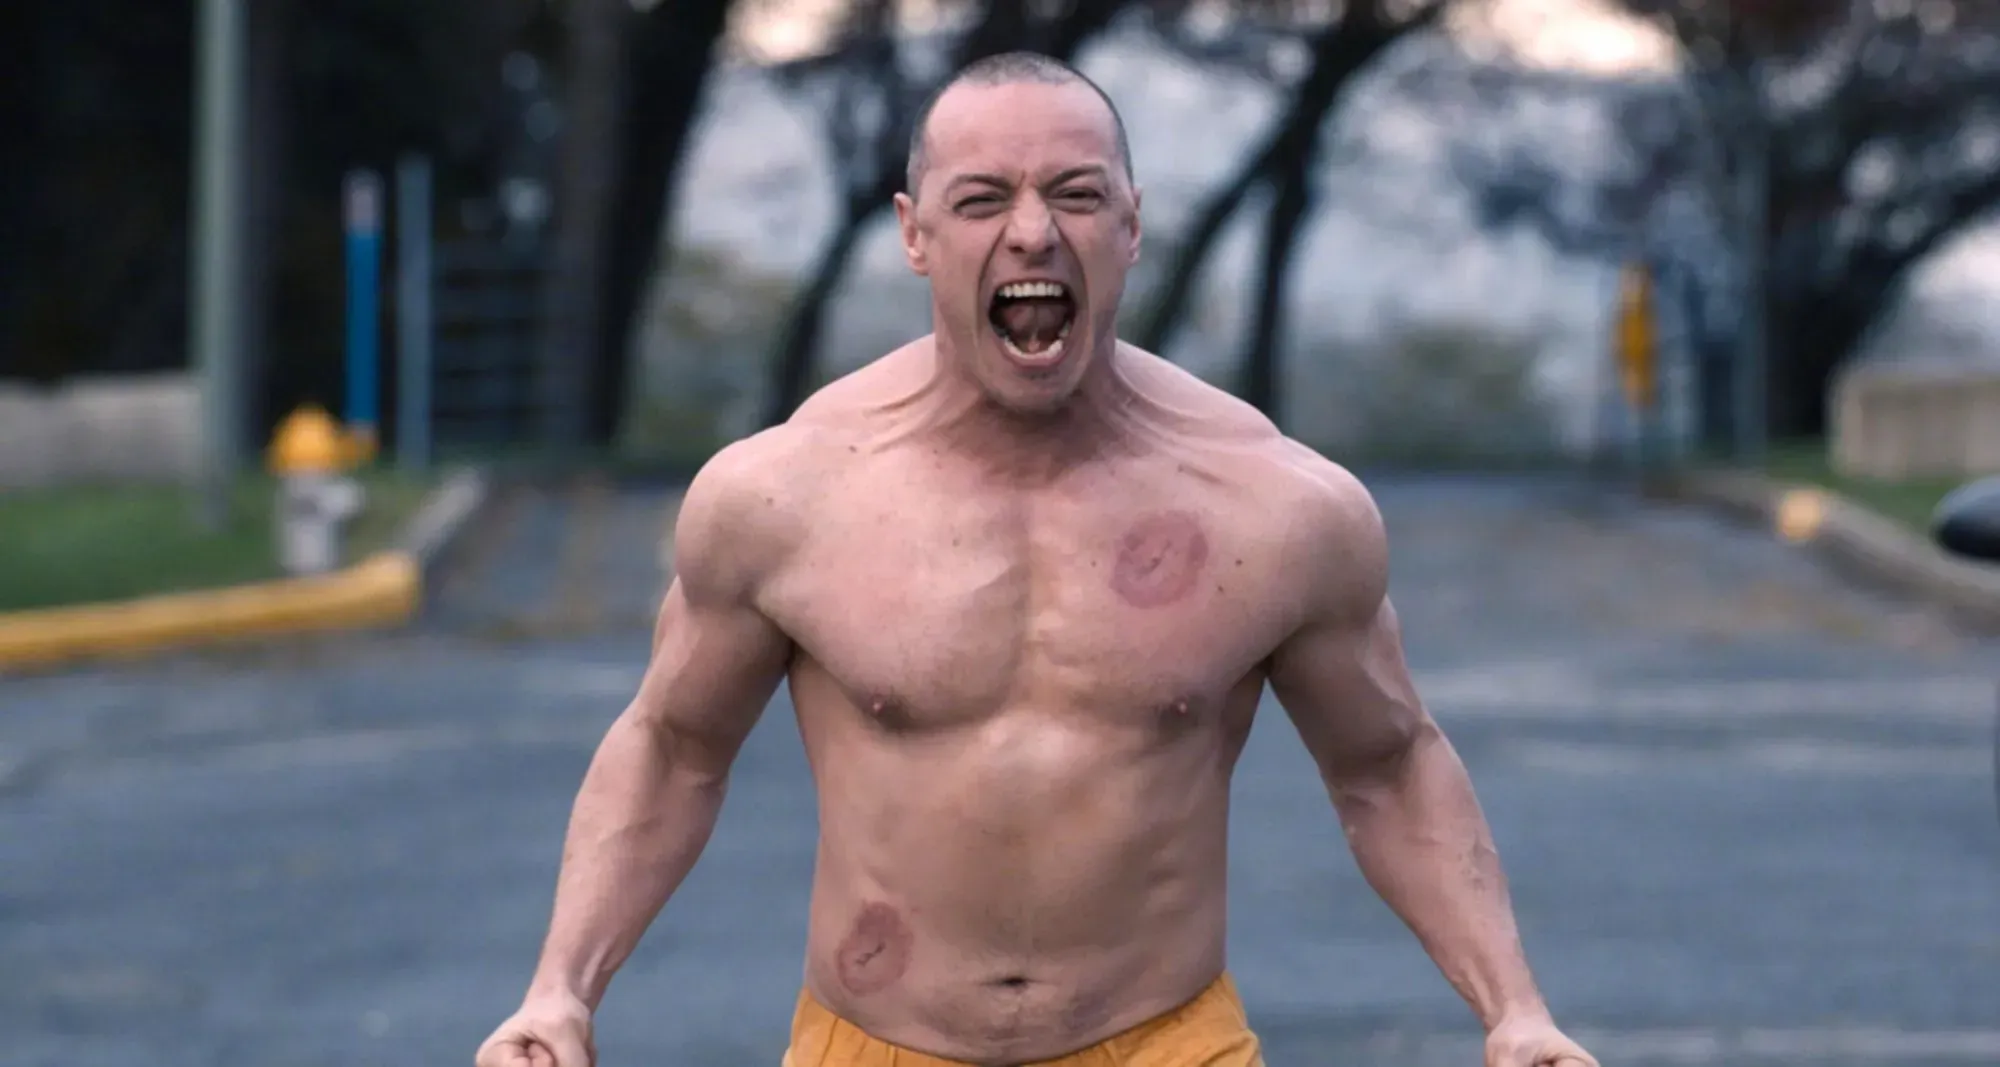 James McAvoy talks about his muscle gain in recent years | FMV6